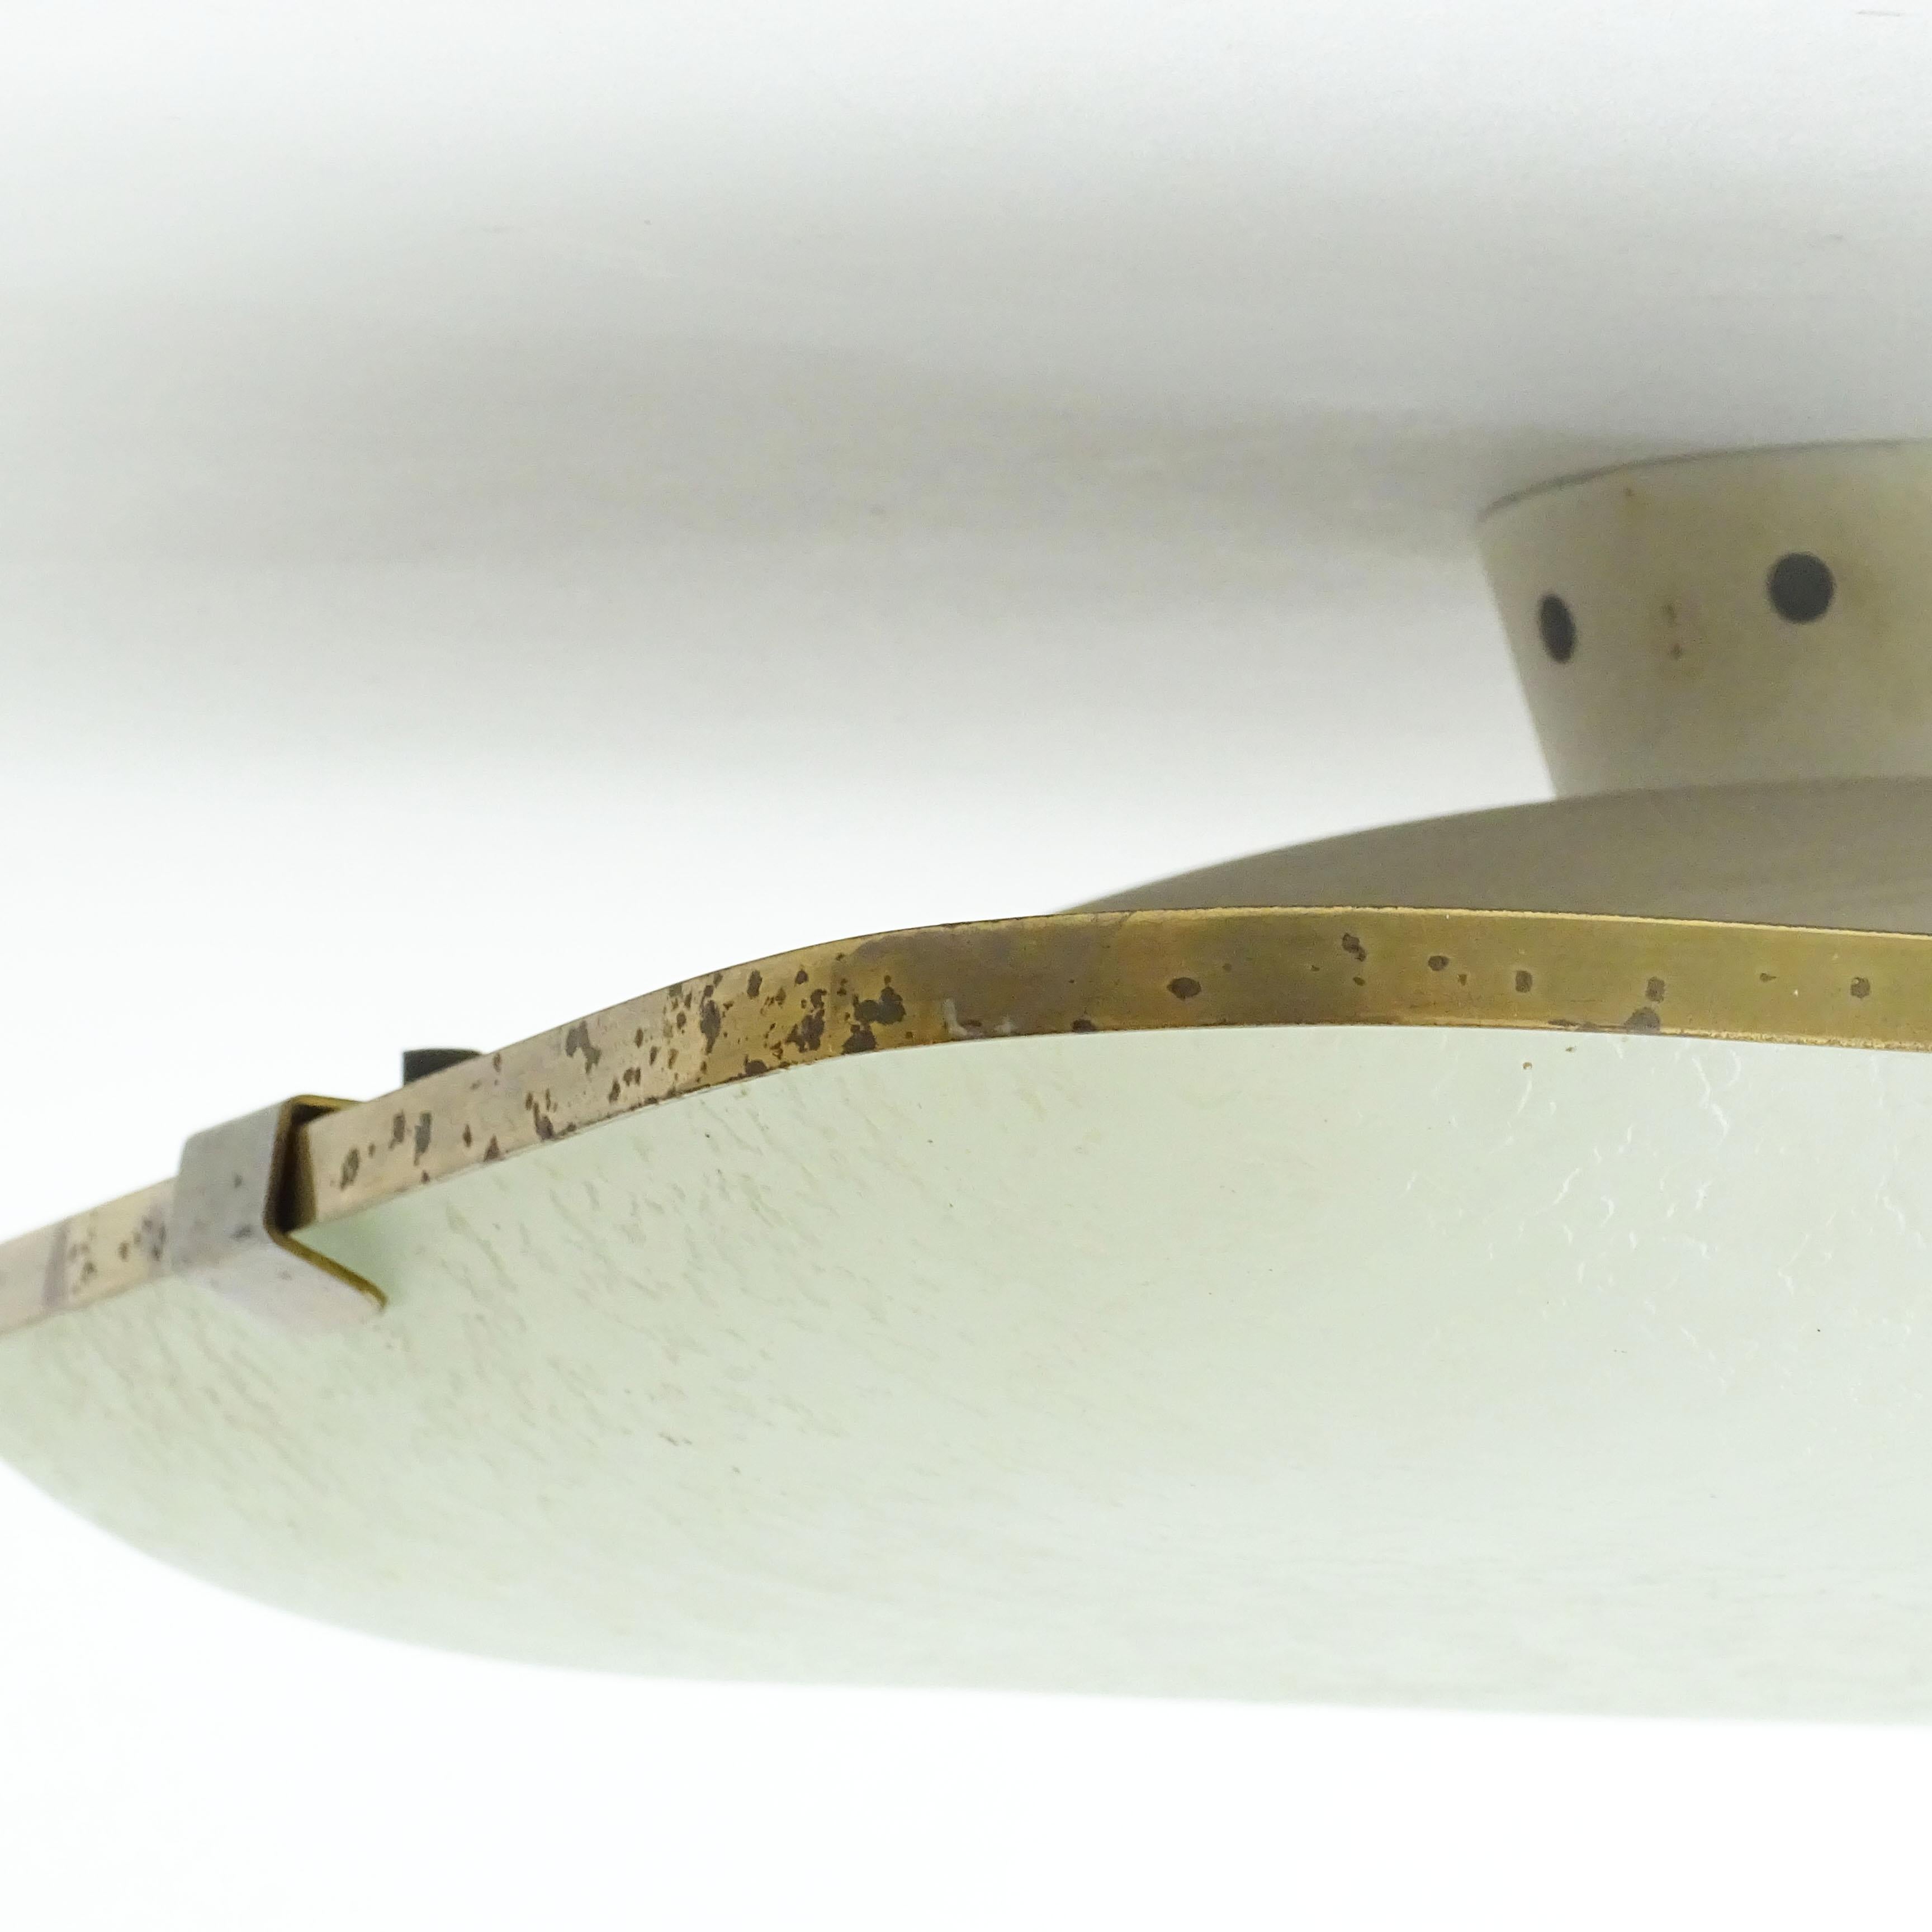 Rare medium size Max Ingrand Model 1485 Ceiling Lamp for Fontana Arte,
Beautifully crafted with acid-etched glass.
The ceiling lamp carries 4 light bulbs.
Ref: Illuminazione, 